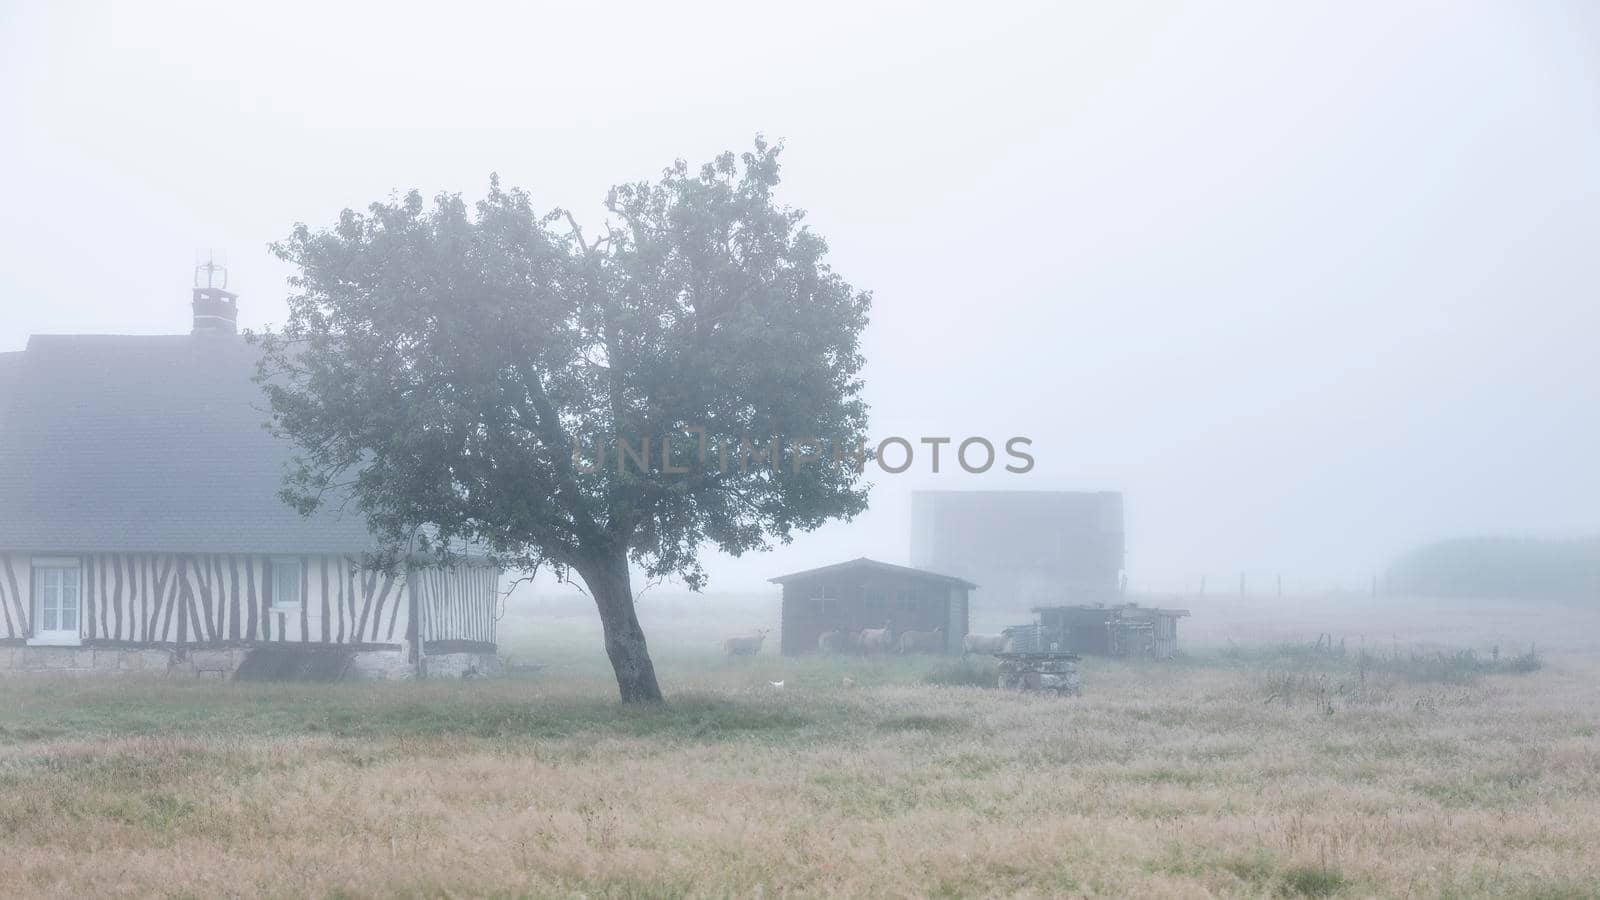 old half timbered farm and sheep in french normandy during morning fog in summer by ahavelaar